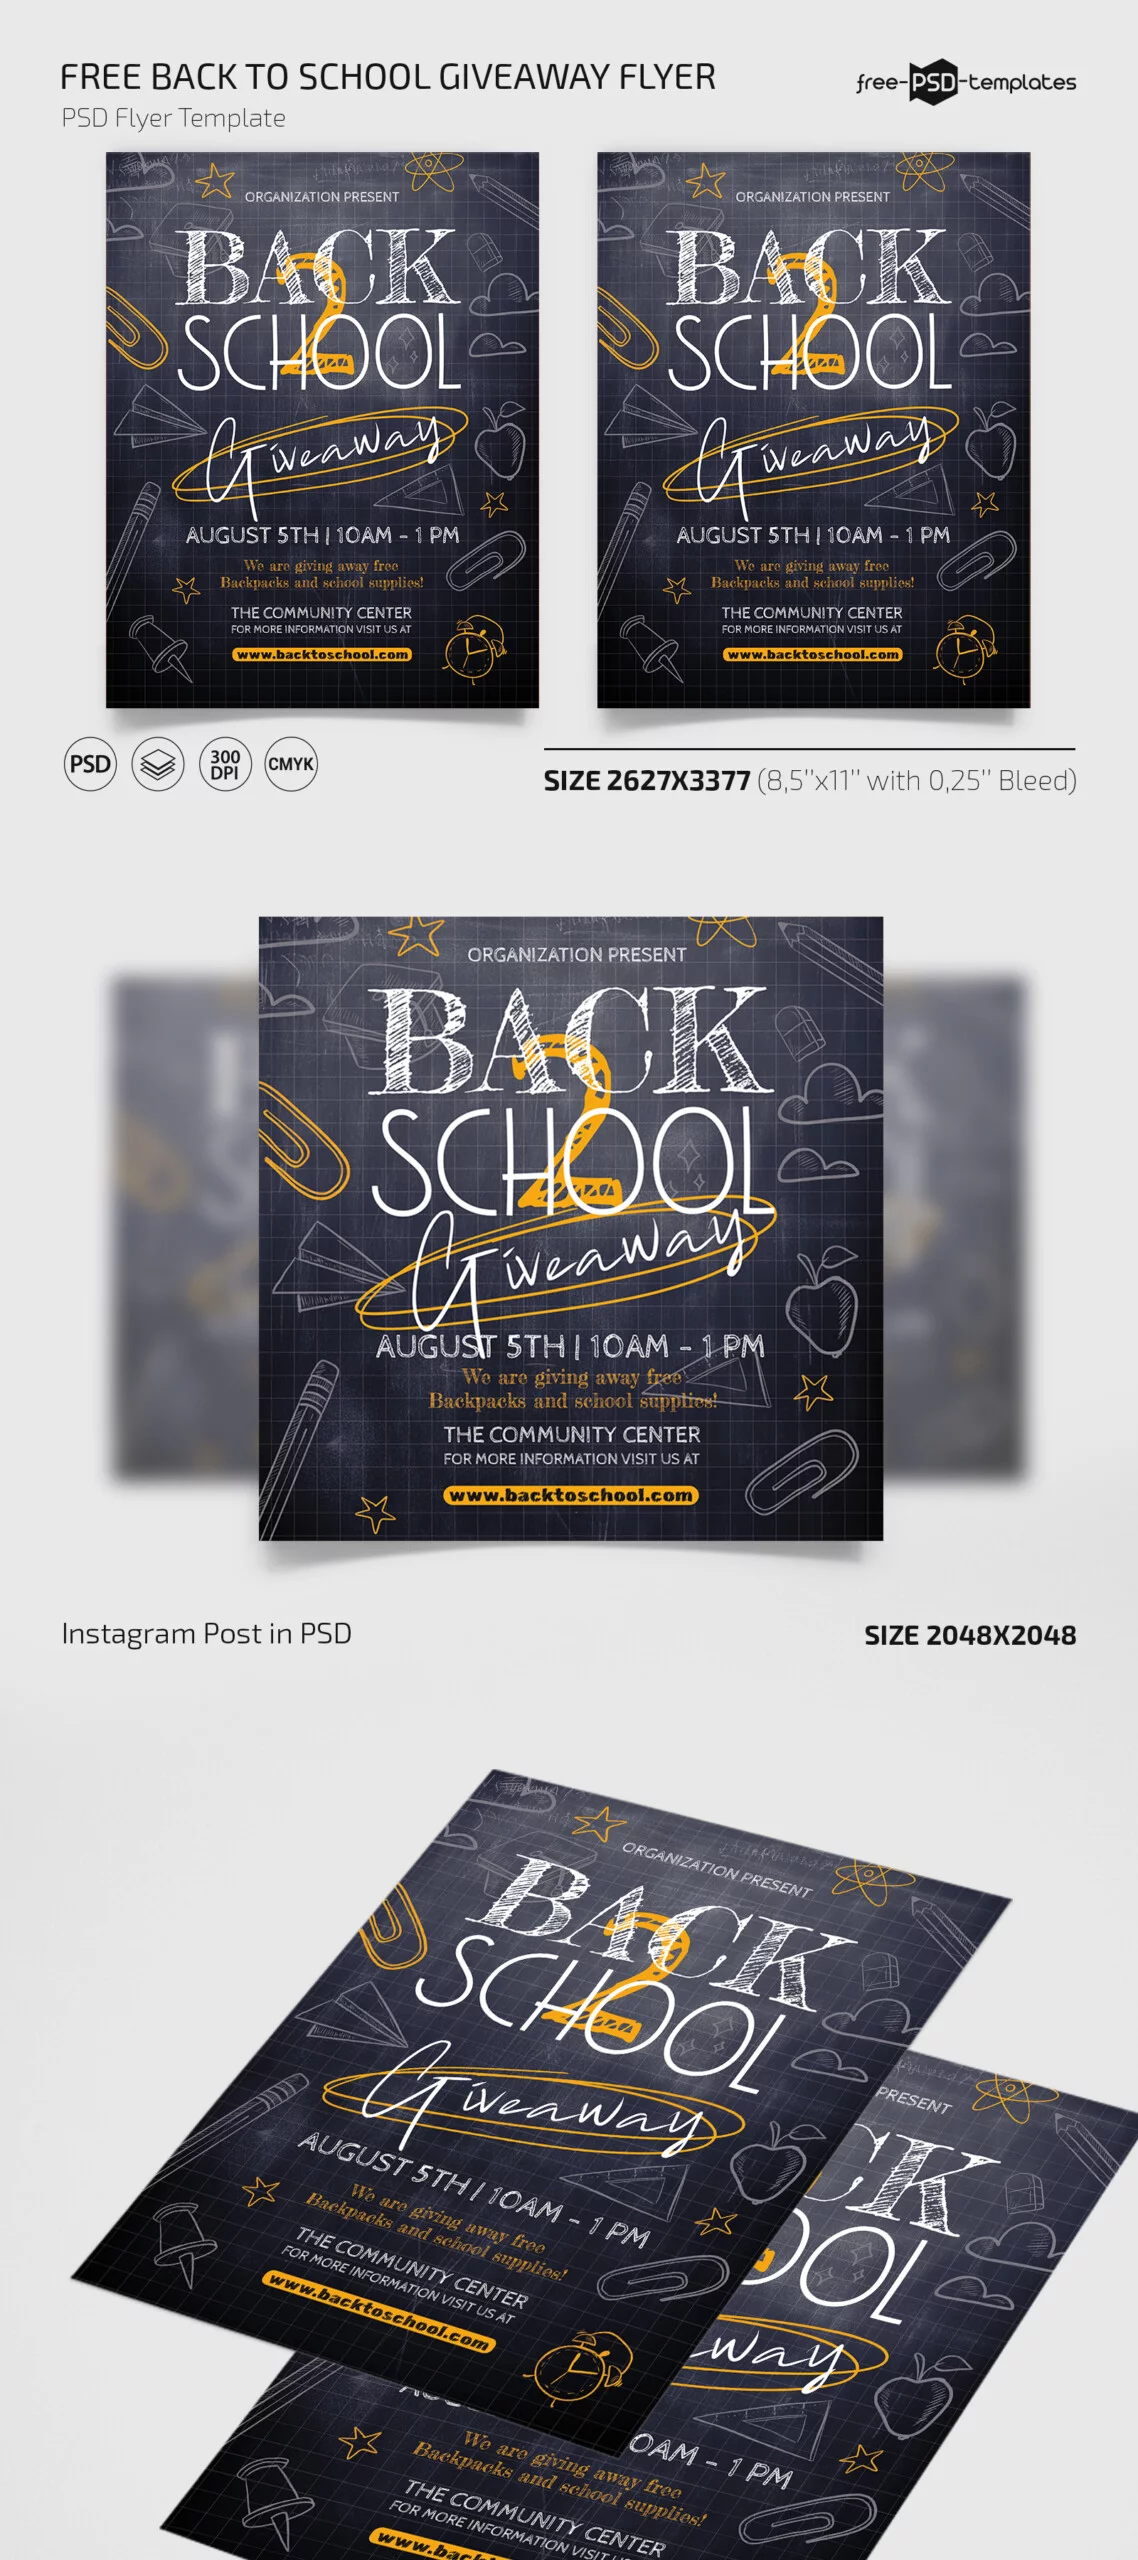 Free Back to School Giveaway Flyer PSD Template